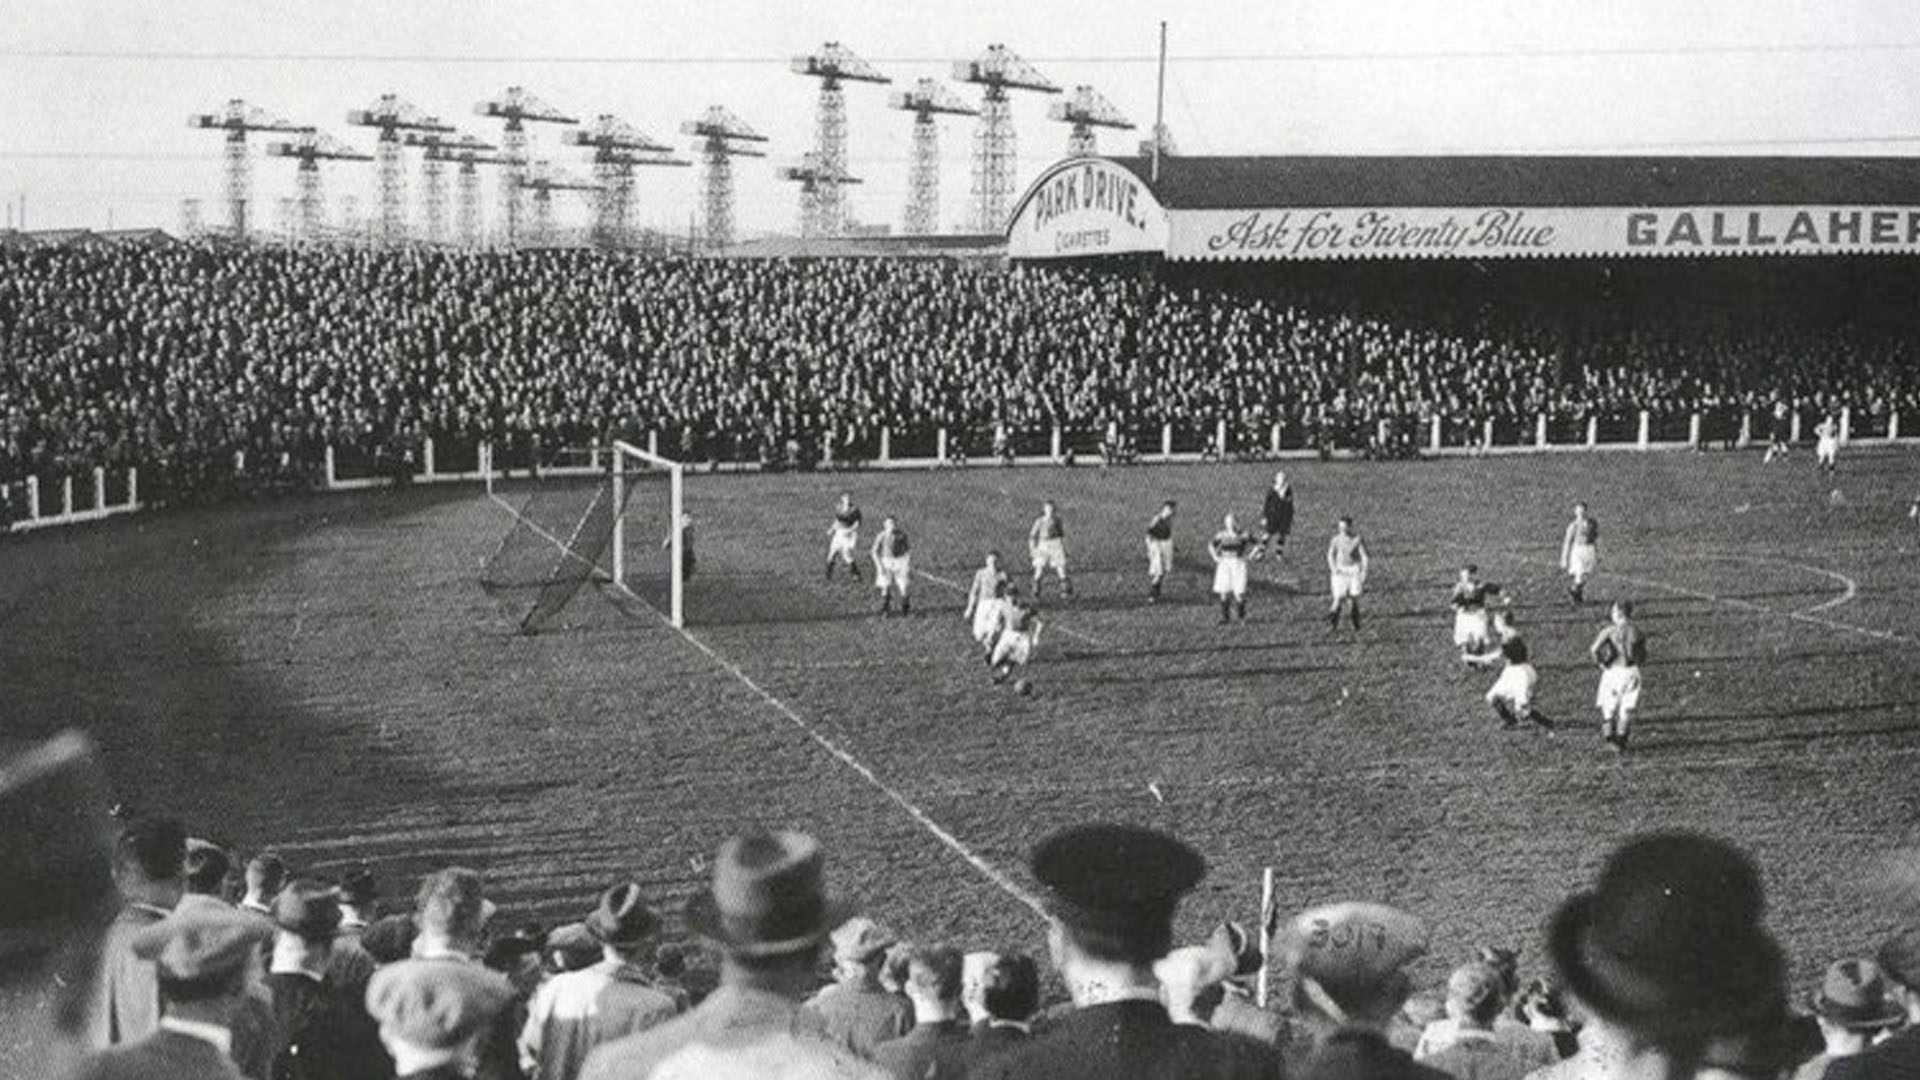 Action from Glentoran F.C. versus Cliftonville F.C. at The Oval in East Belfast during the 1937 season, the first spent in Belfast by goalkeeper Thomas Pearson.